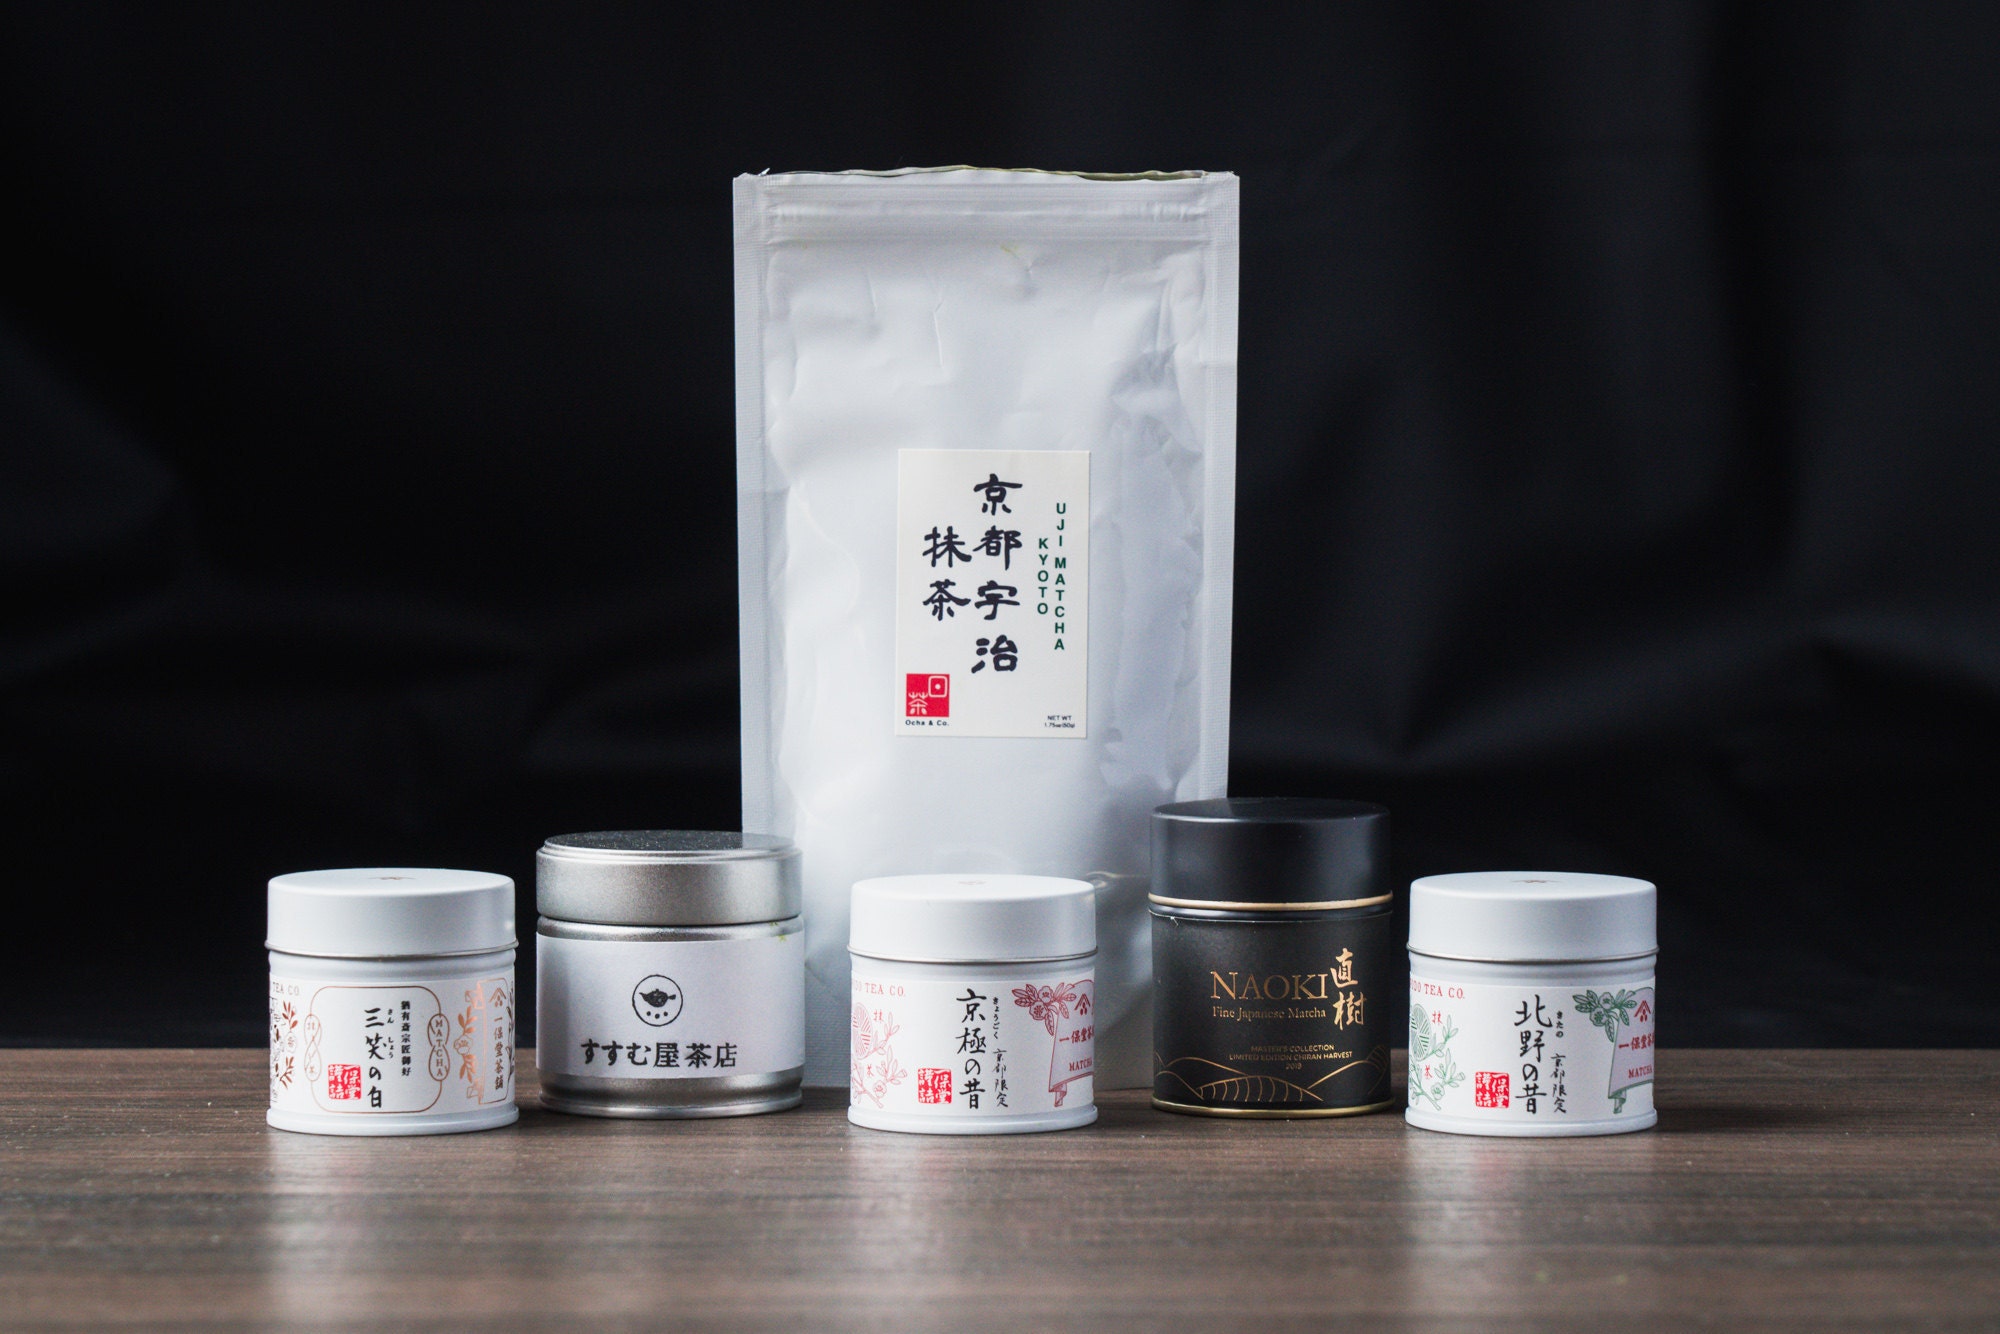 Ippodo Tea - Basic Matcha Kit - For Usucha, Koicha and Lattes - Rich and  Smooth - Matcha and Utensils - Kyoto Since 1717